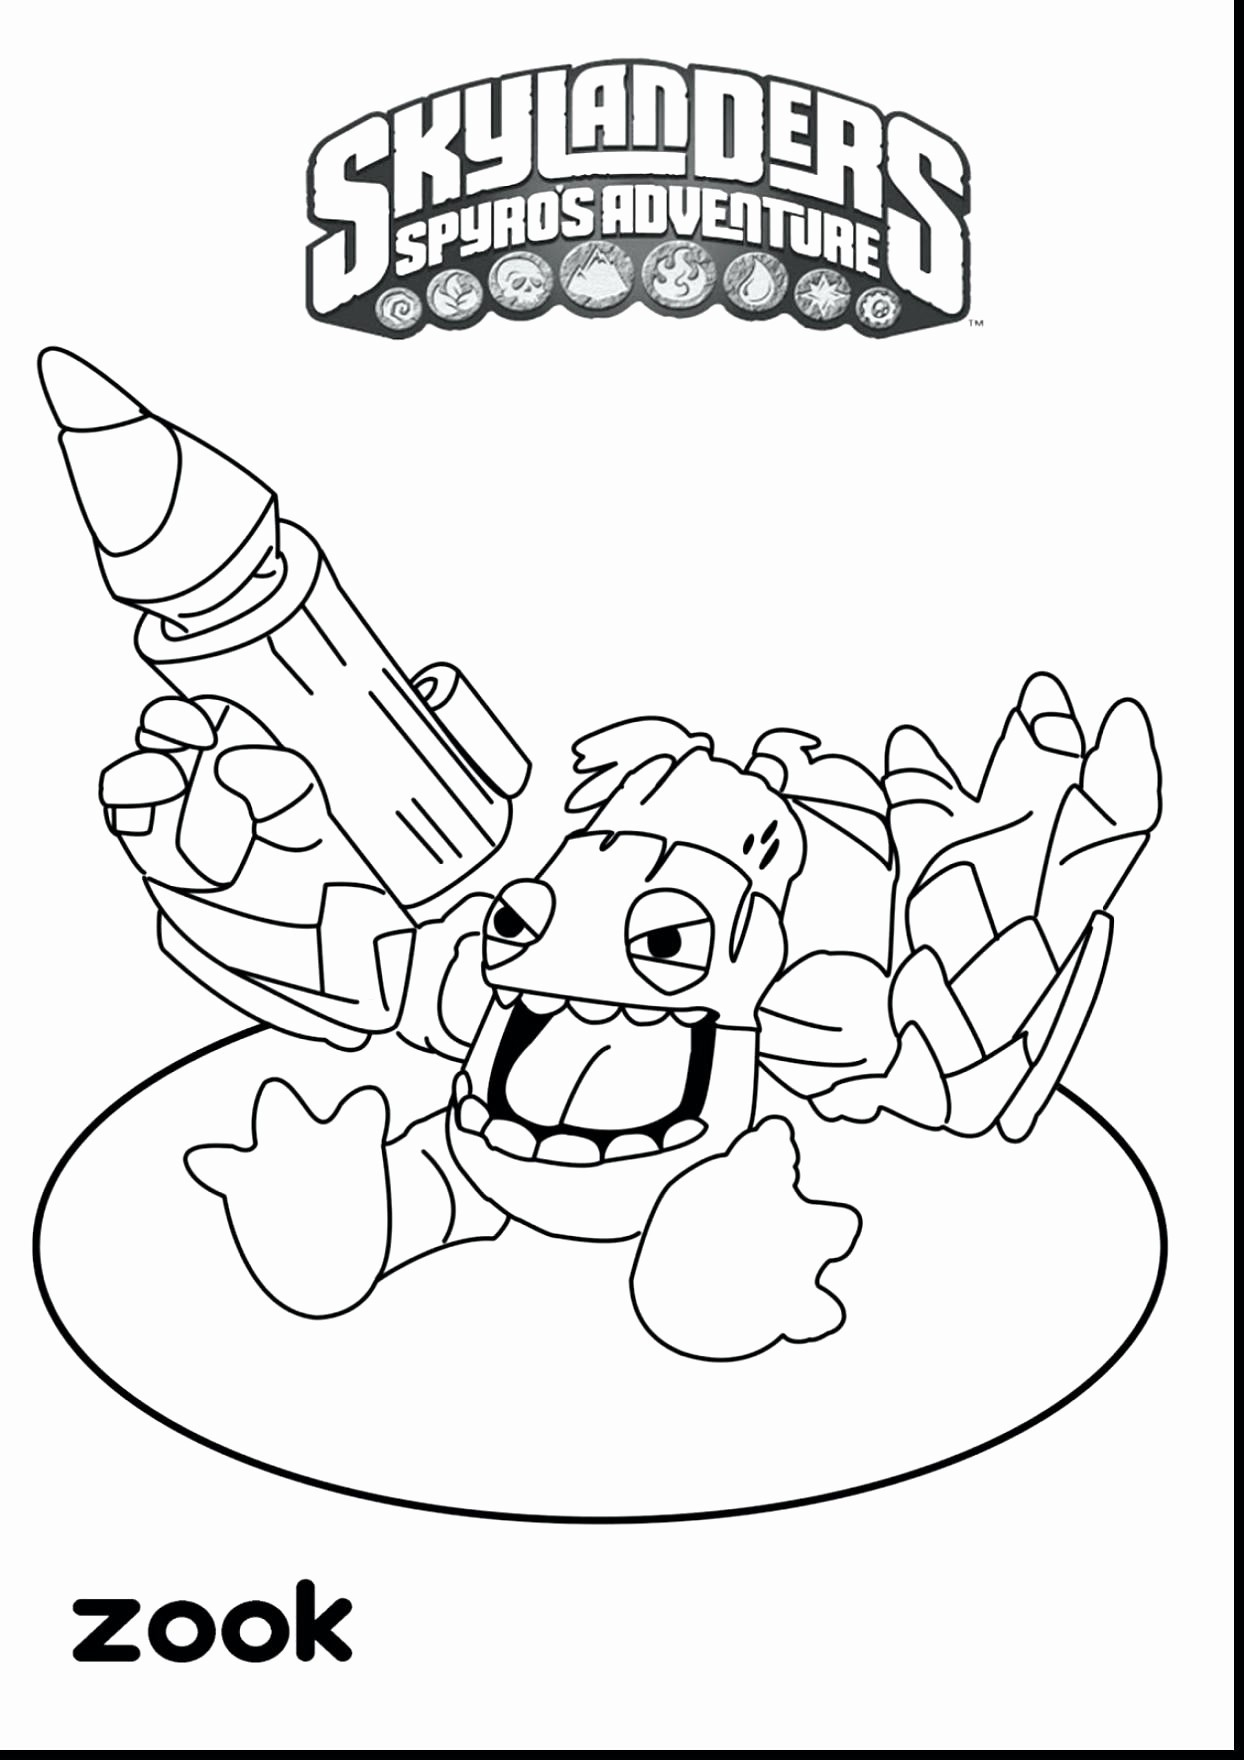 Banana Split Coloring Page Coloring Ideas Banana Splitoloring Page Luxuryurious George